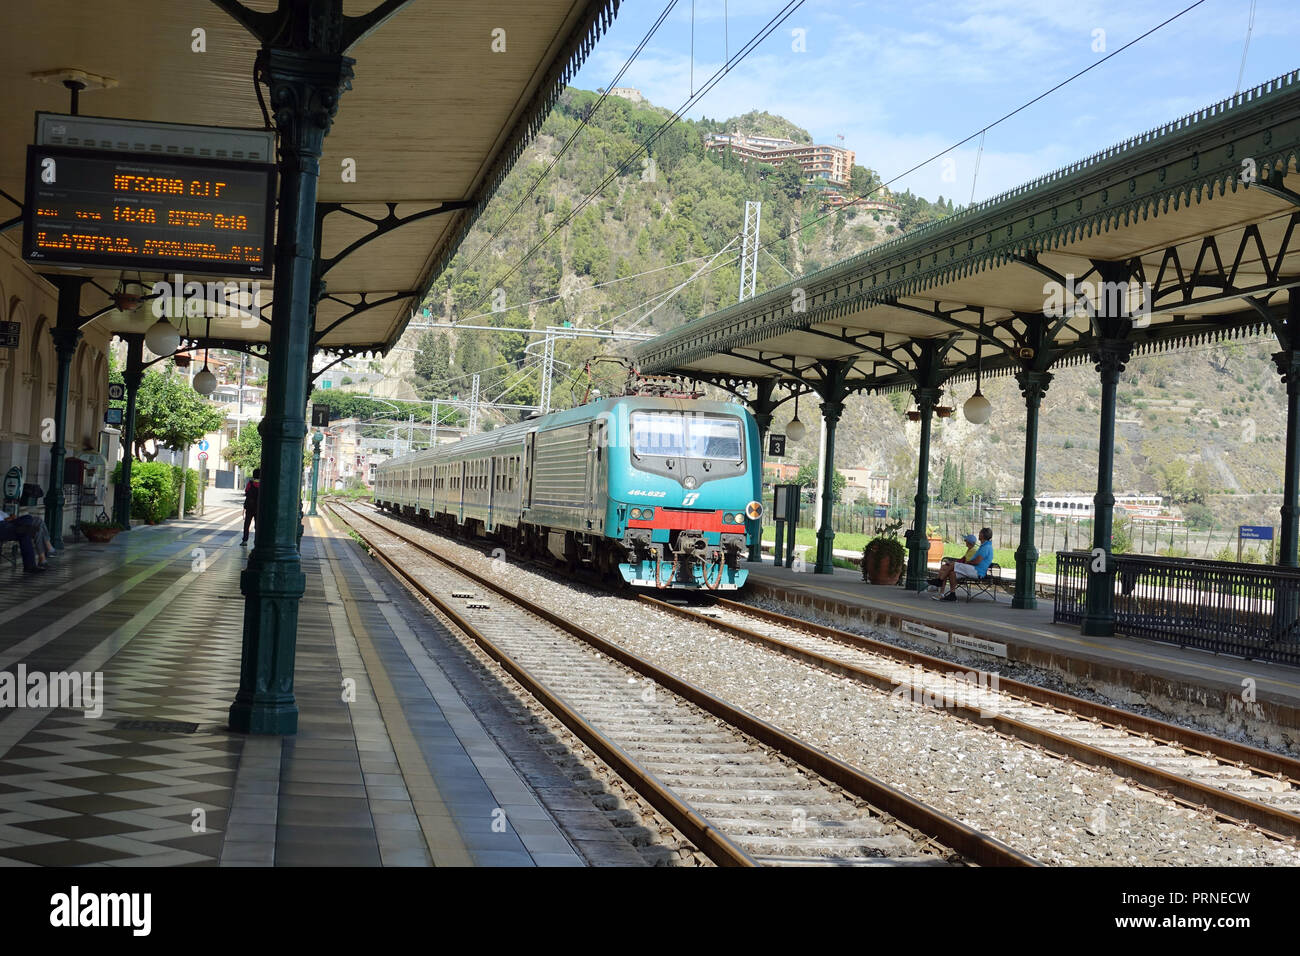 Sicily, Italy. 04th Sep, 2018. The Taormina-Giardini railway station. Taormina railway station (officially called Taormina-Giardini) is located in the district of Villagonia, a few metres from the coast. On the occasion of the visit of the Austrian Empress Elisabeth, the Taormina-Giardini railway station, built in 1866, was considerably extended and the main building in Art Nouveau style, which still exists today, was preserved. Credit: Alexandra Schuler/dpa/Alamy Live News Stock Photo